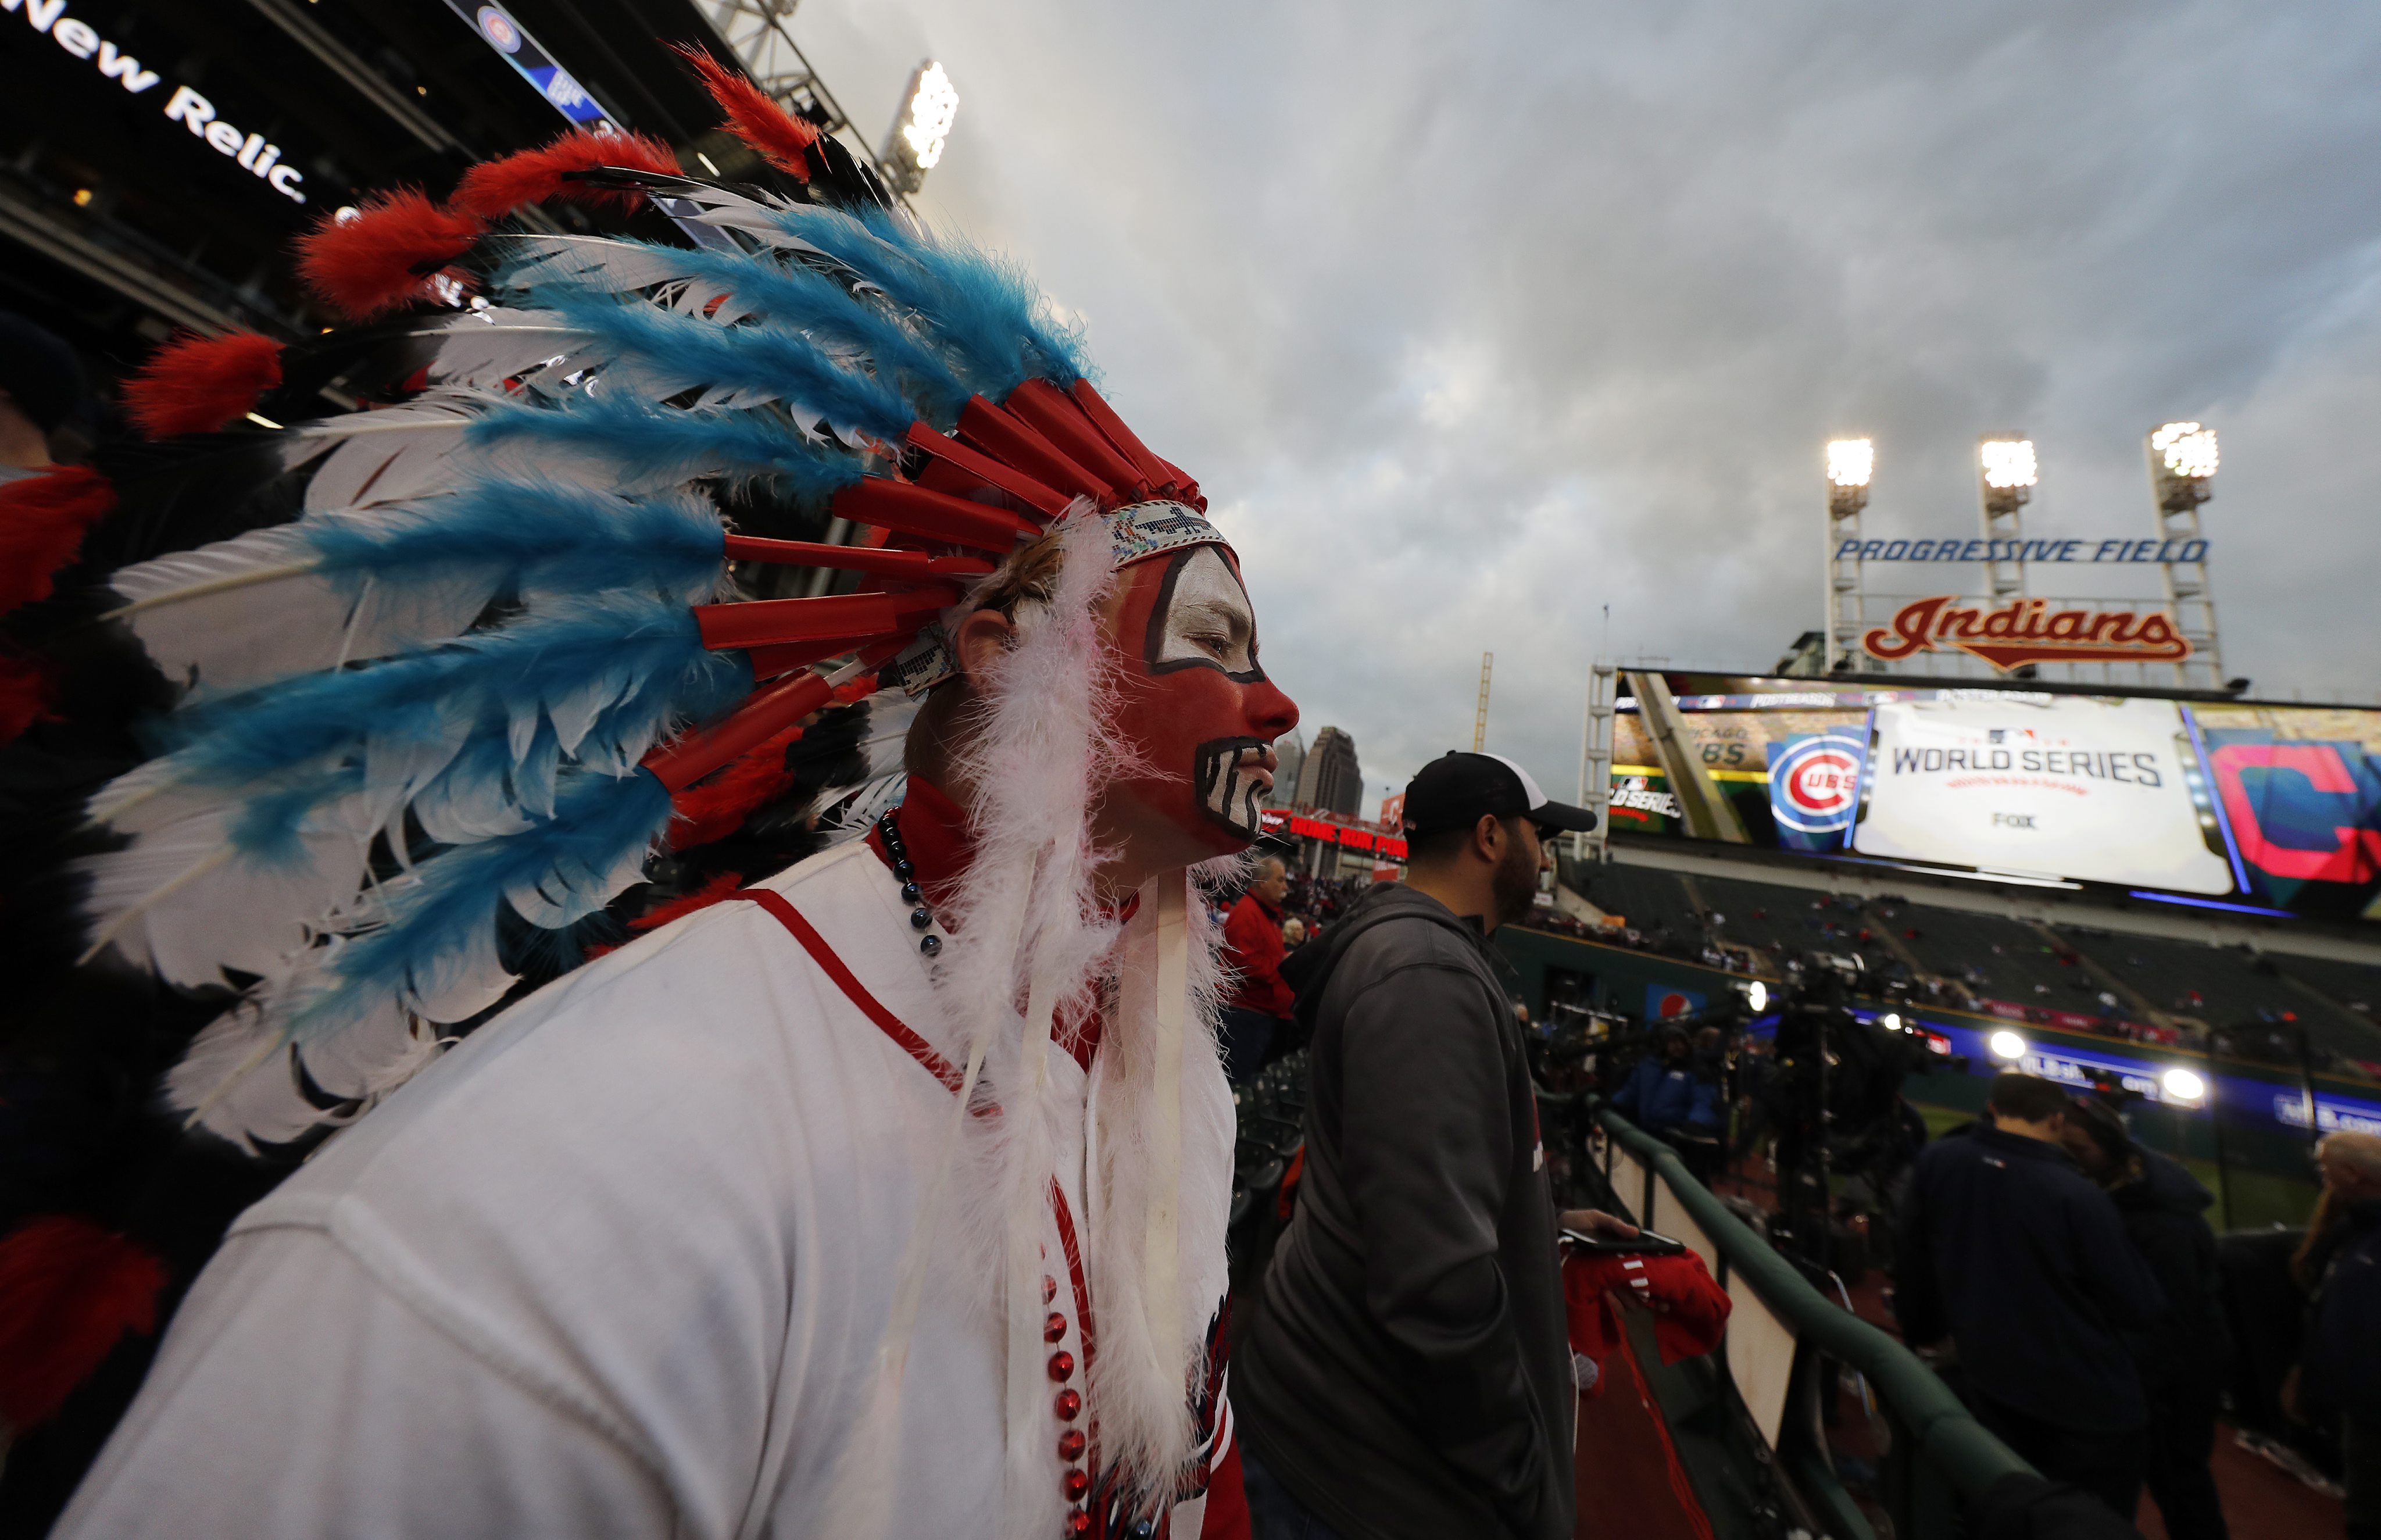 Indians' Chief Wahoo image is ridiculous, offensive—and should be